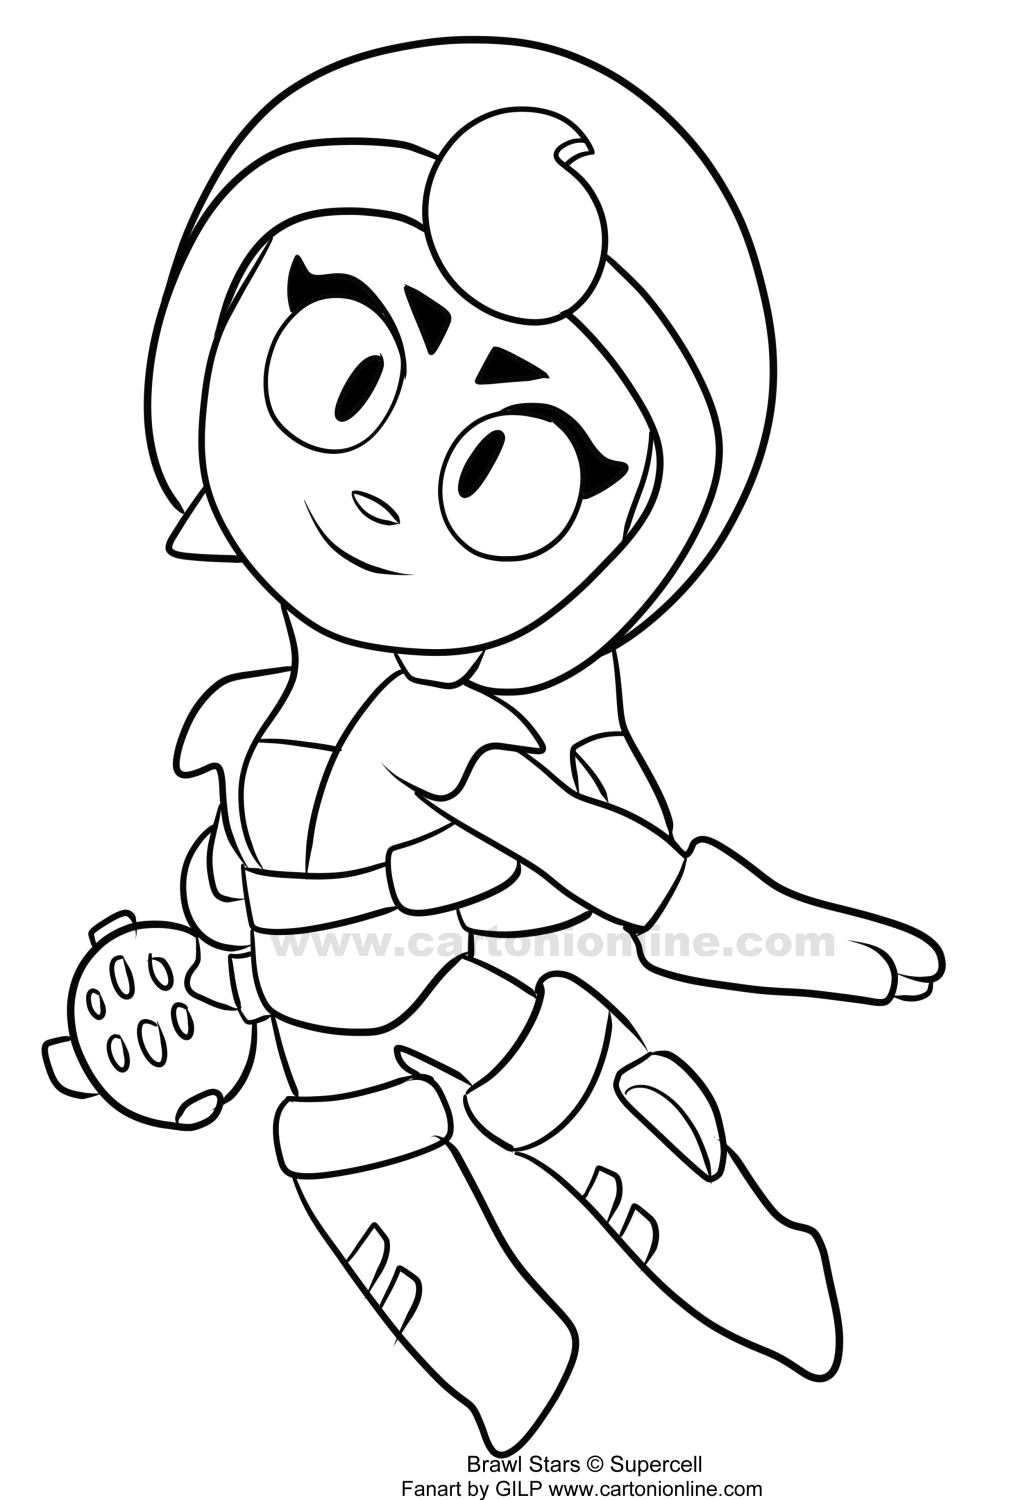 Janet 04 von Brawl Stars coloring page to print and coloring